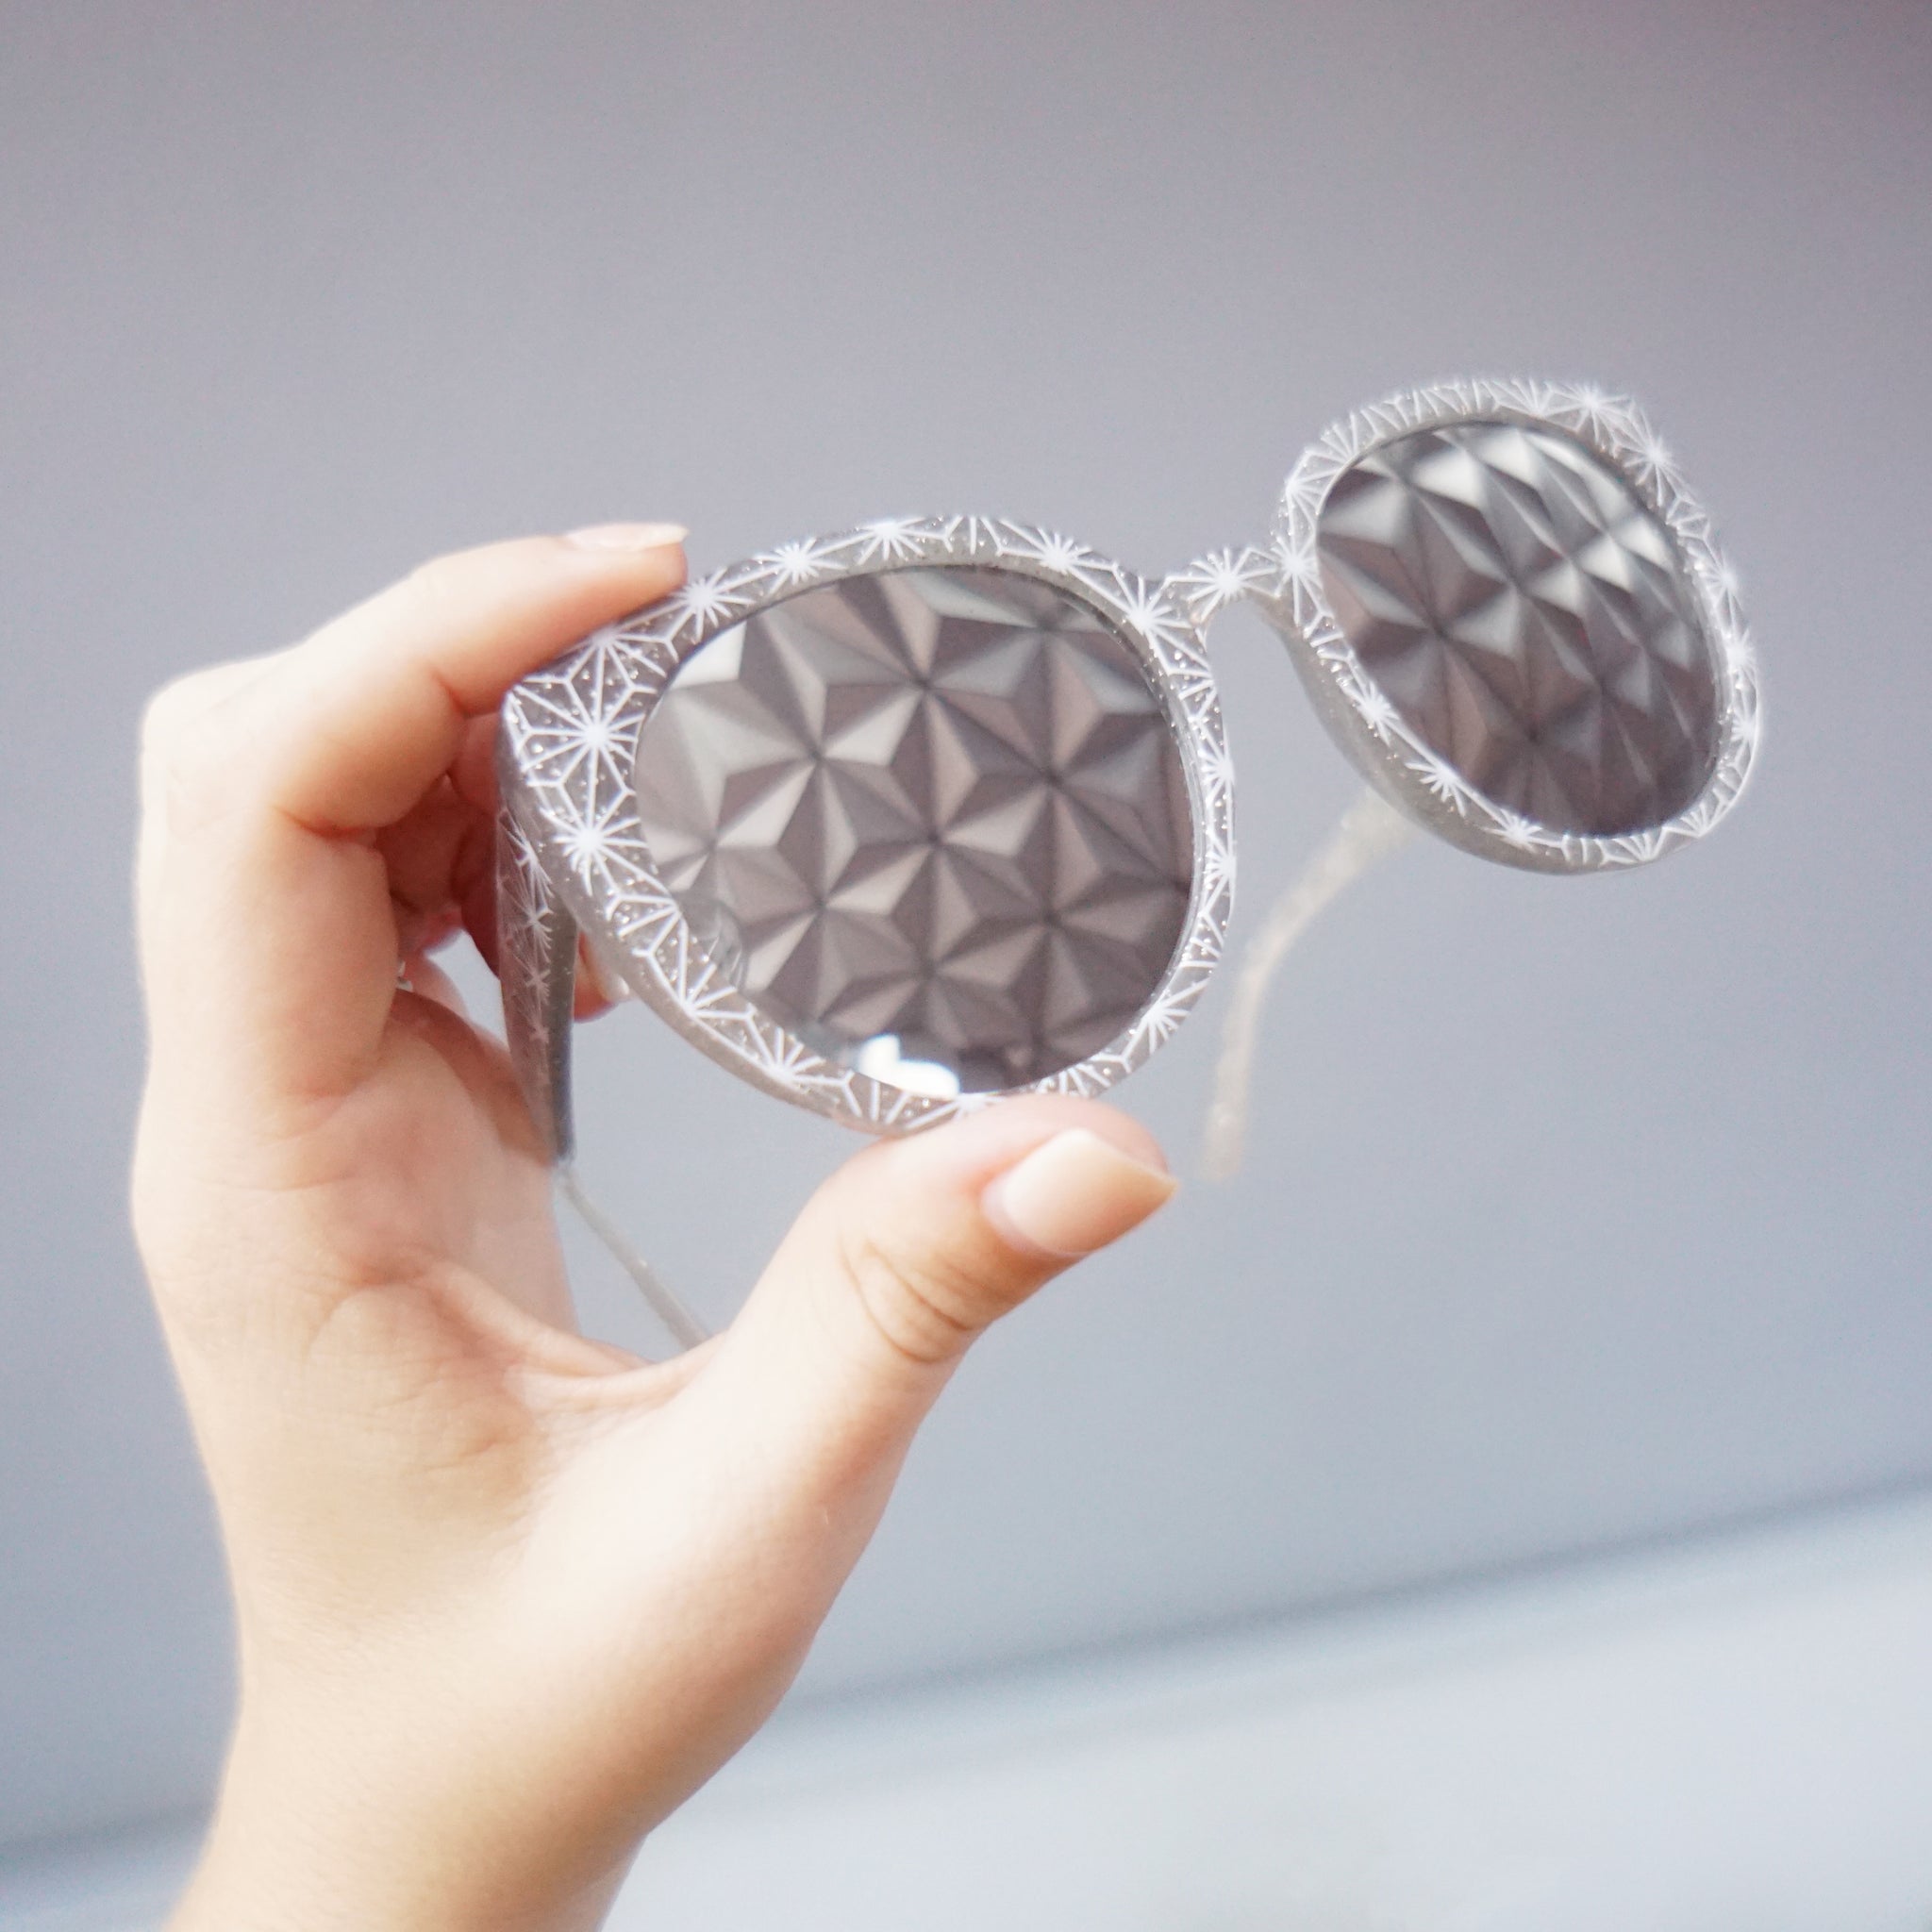 Grand and Miraculous Sunnies (Silver Glitter)